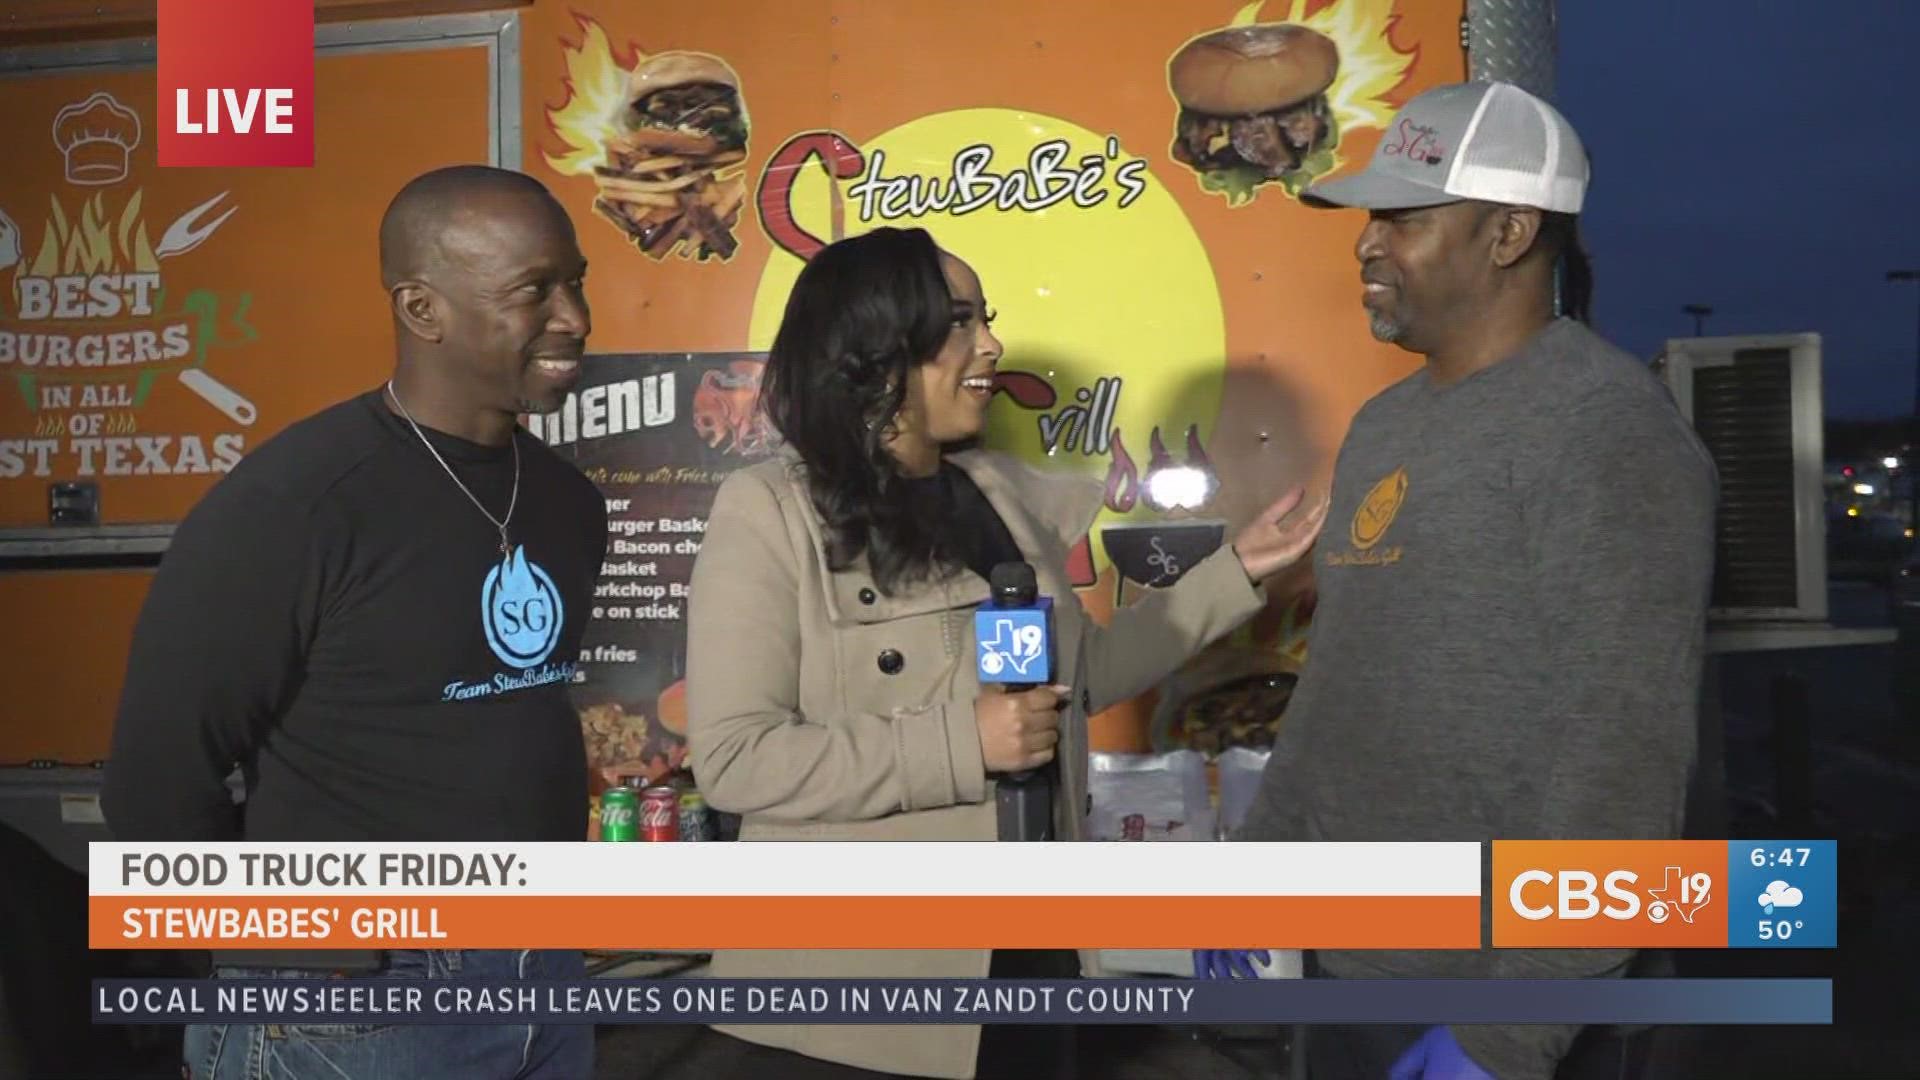 This week's Food Truck Friday, CBS19 features Stewbabes' Grill.